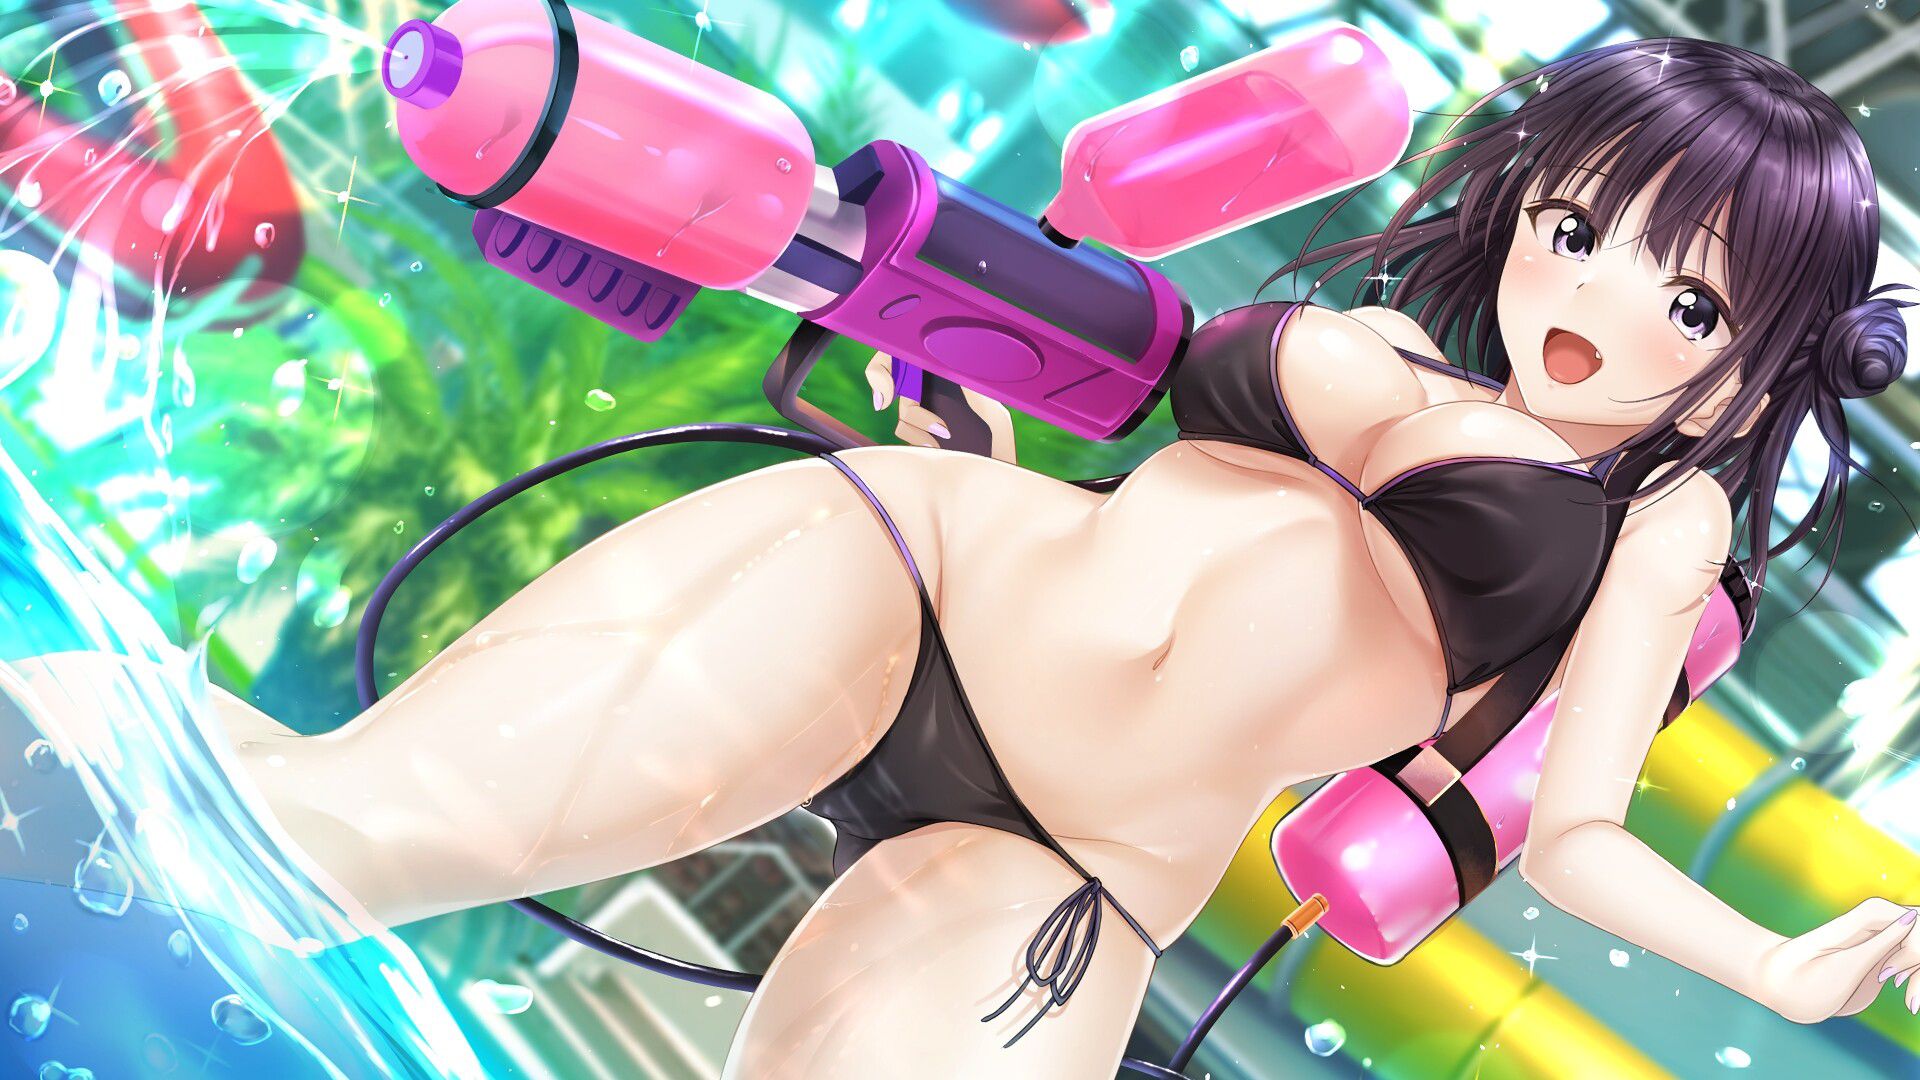 PS4 / Switch version "Aikiss 3 cute" Erotic event CG of boob whiplash swimsuit newly released! 7